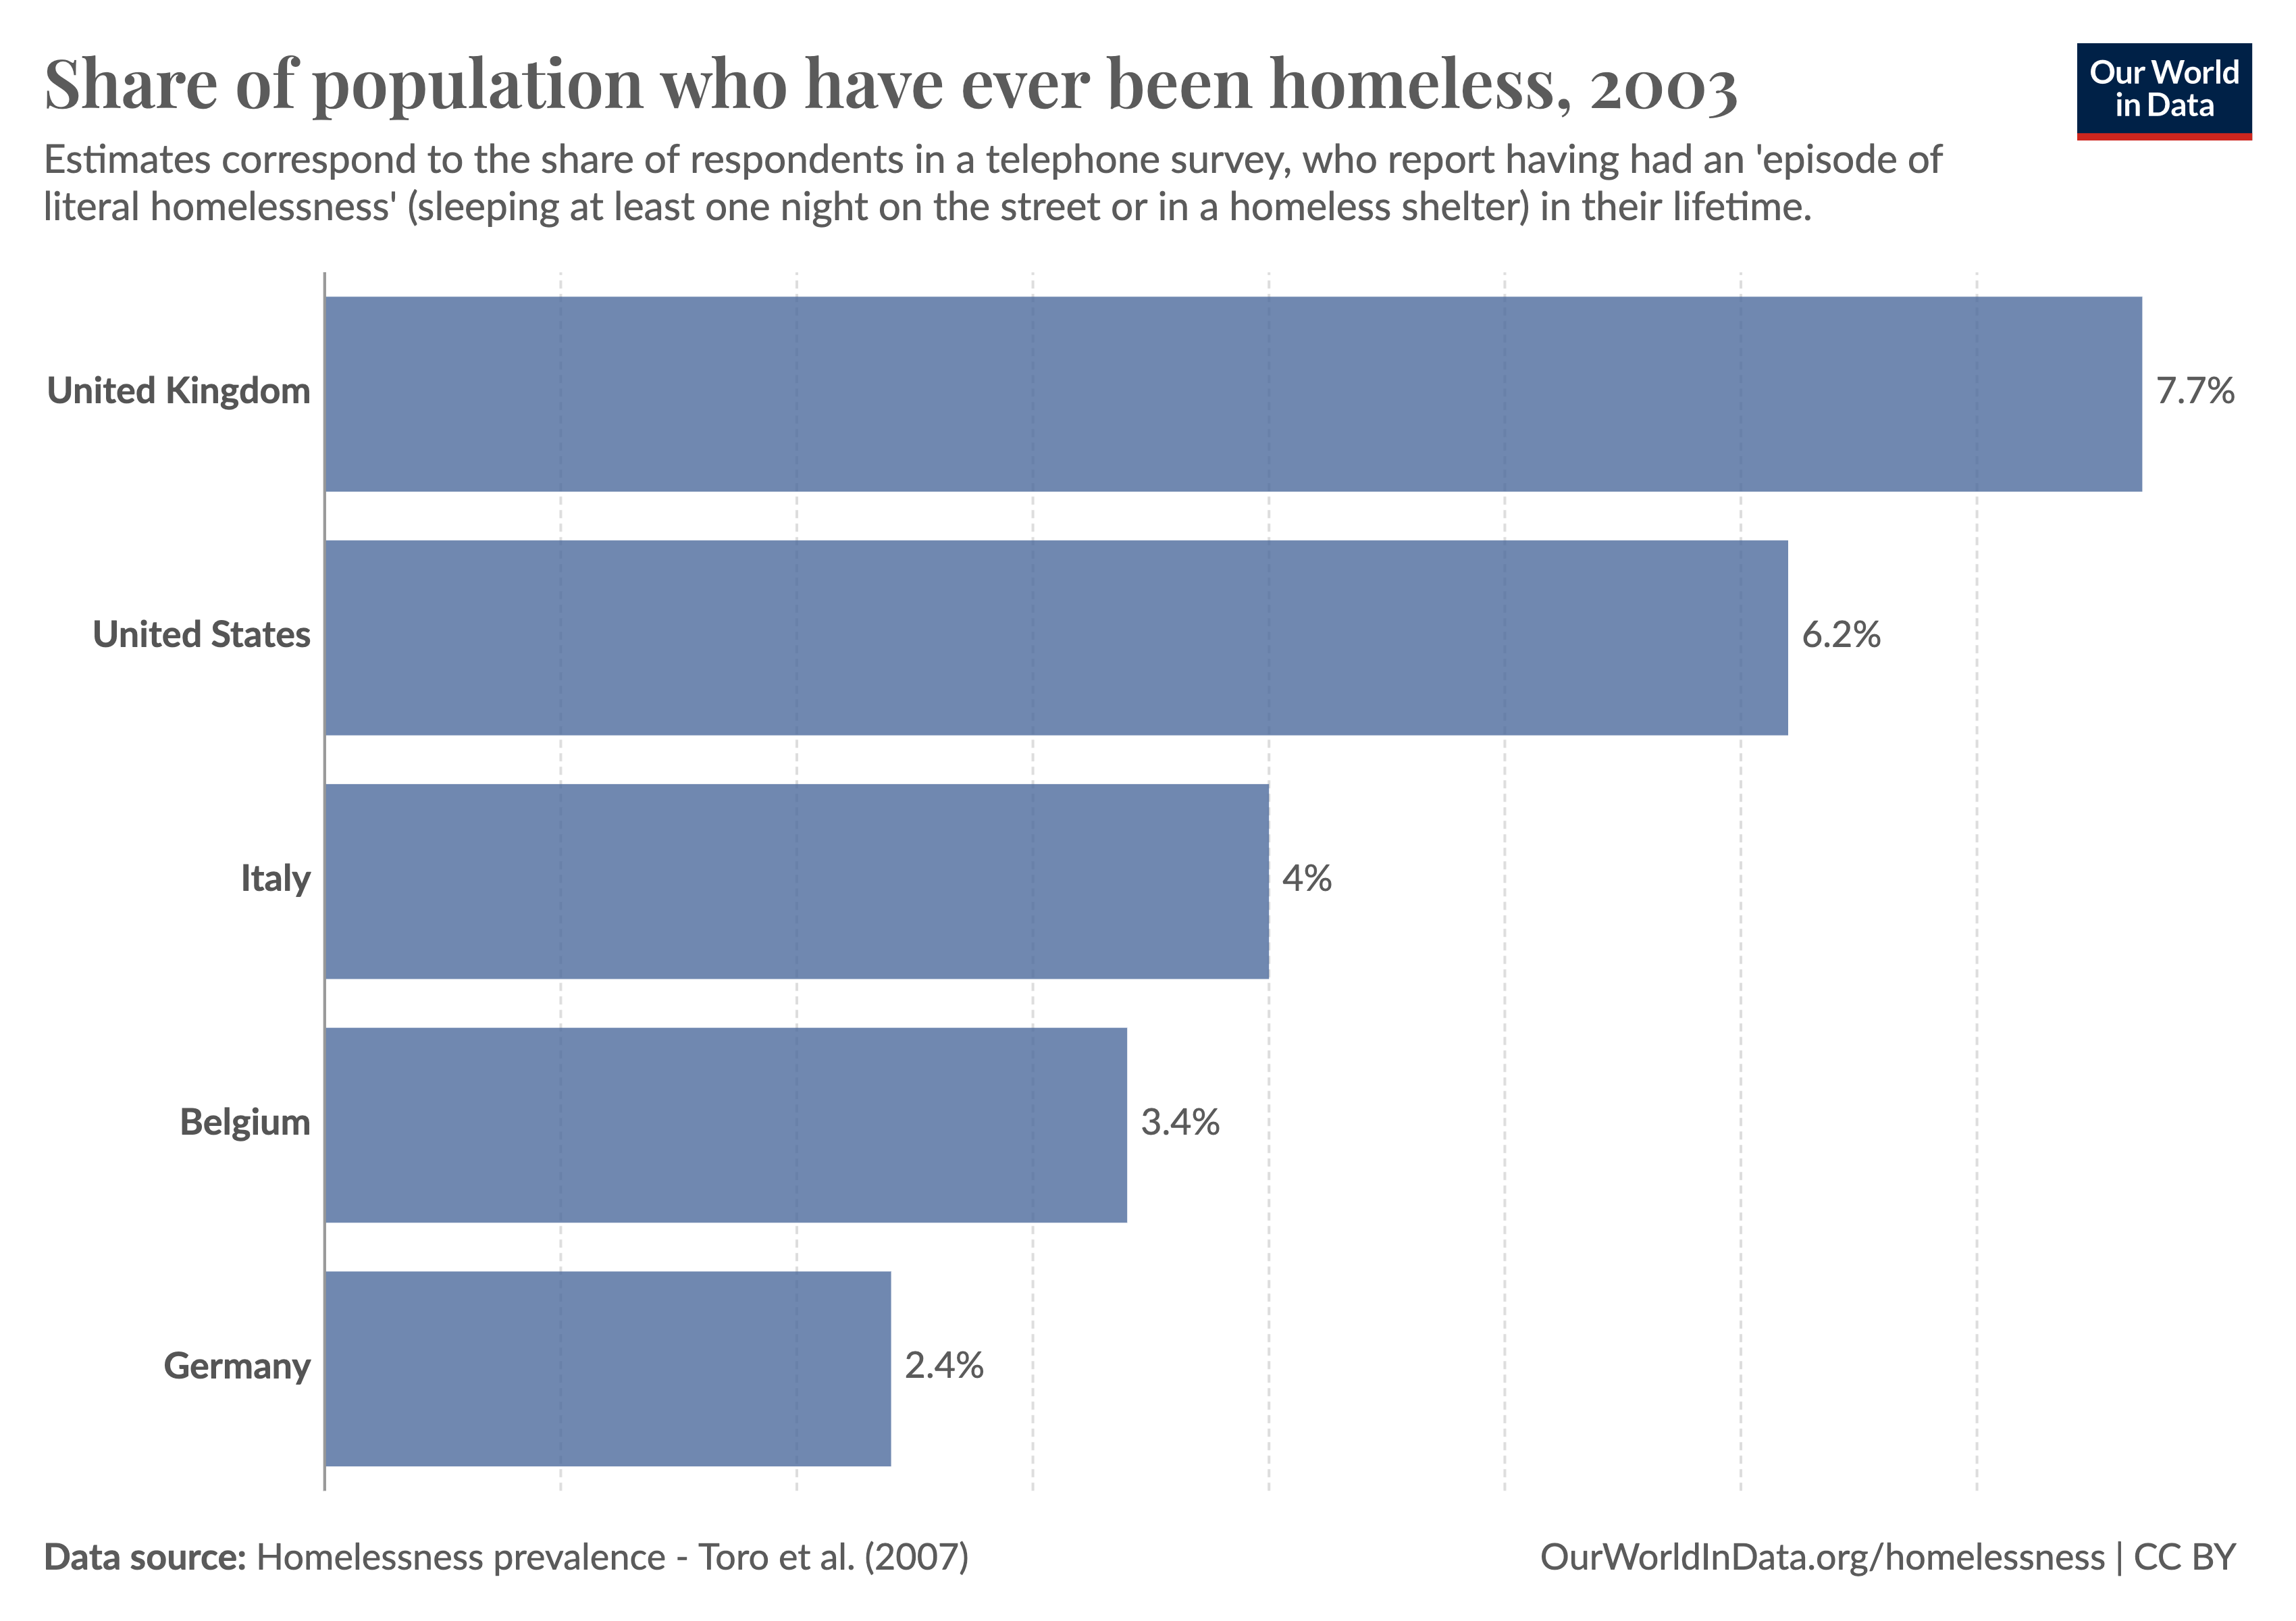 Bar chart showing the share of the population who have ever been homeless in the UK, US, Italy, Belgium, and Germany, ranging from 7.7% in the UK to 2.4% in Germany.